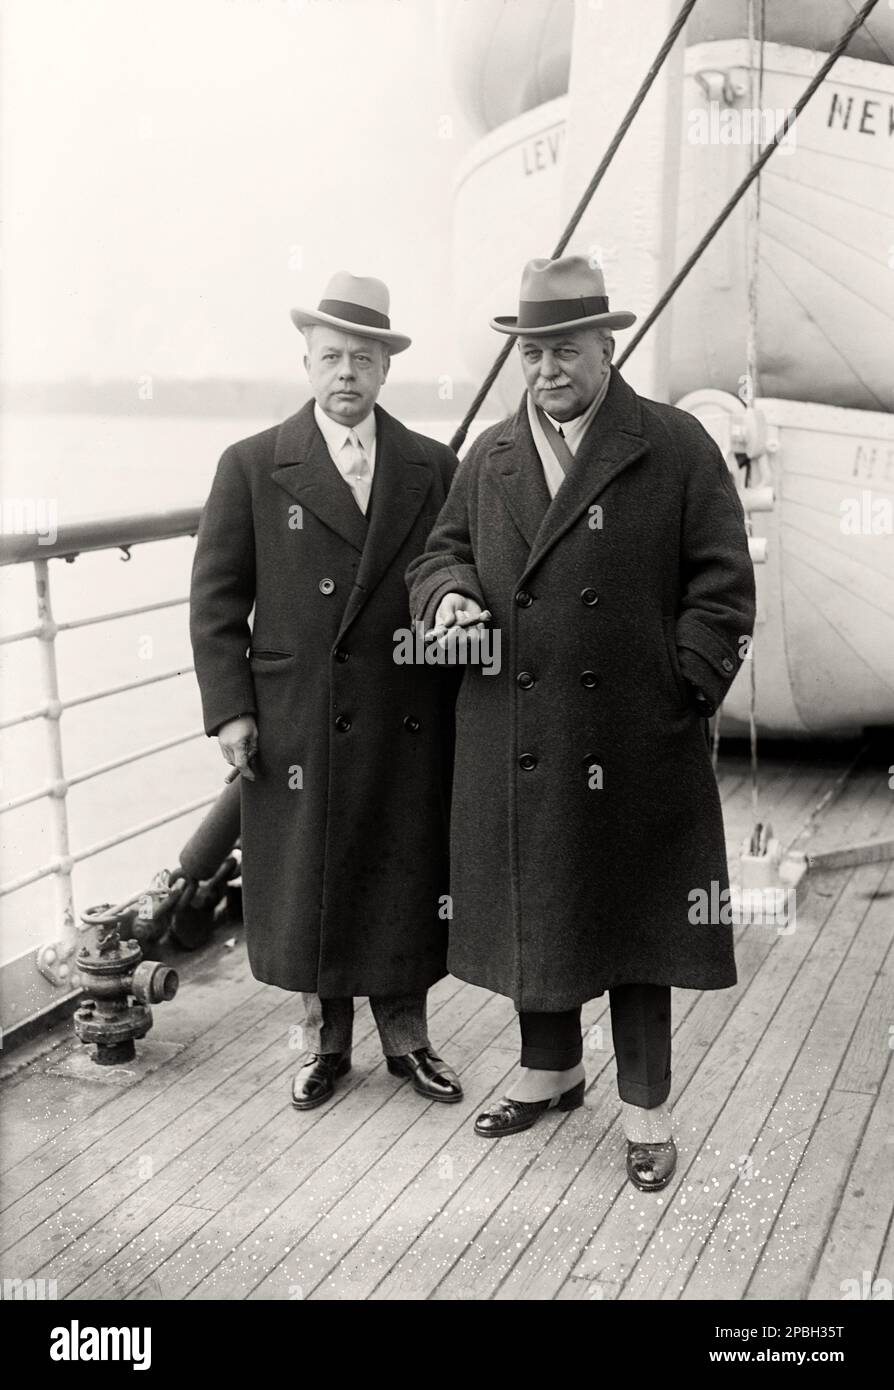 1922 ca , New York , USA : The british Sir CHARLES F. HIGHAM ( left in this photo) with the traveller and english writer GEORGE KINGSLEY , just arrive in USA on ocean liner Leviathan  . Kingsley was married with Mary Bailey and was the father of celebrated MARY Henrietta KINGSLEY  ( 1862 – 1900 ), writer and woman explorer who greatly influenced European ideas about Africa and African people . Mary Kingsley was also the niece of celebrated british novellist Charles Kingsley (1819-1875) . GEORGE KINGSLEY  was a doctor and worked for George Herbert, 13th Earl of Pembroke . Sir Charles Higham, M. Stock Photo